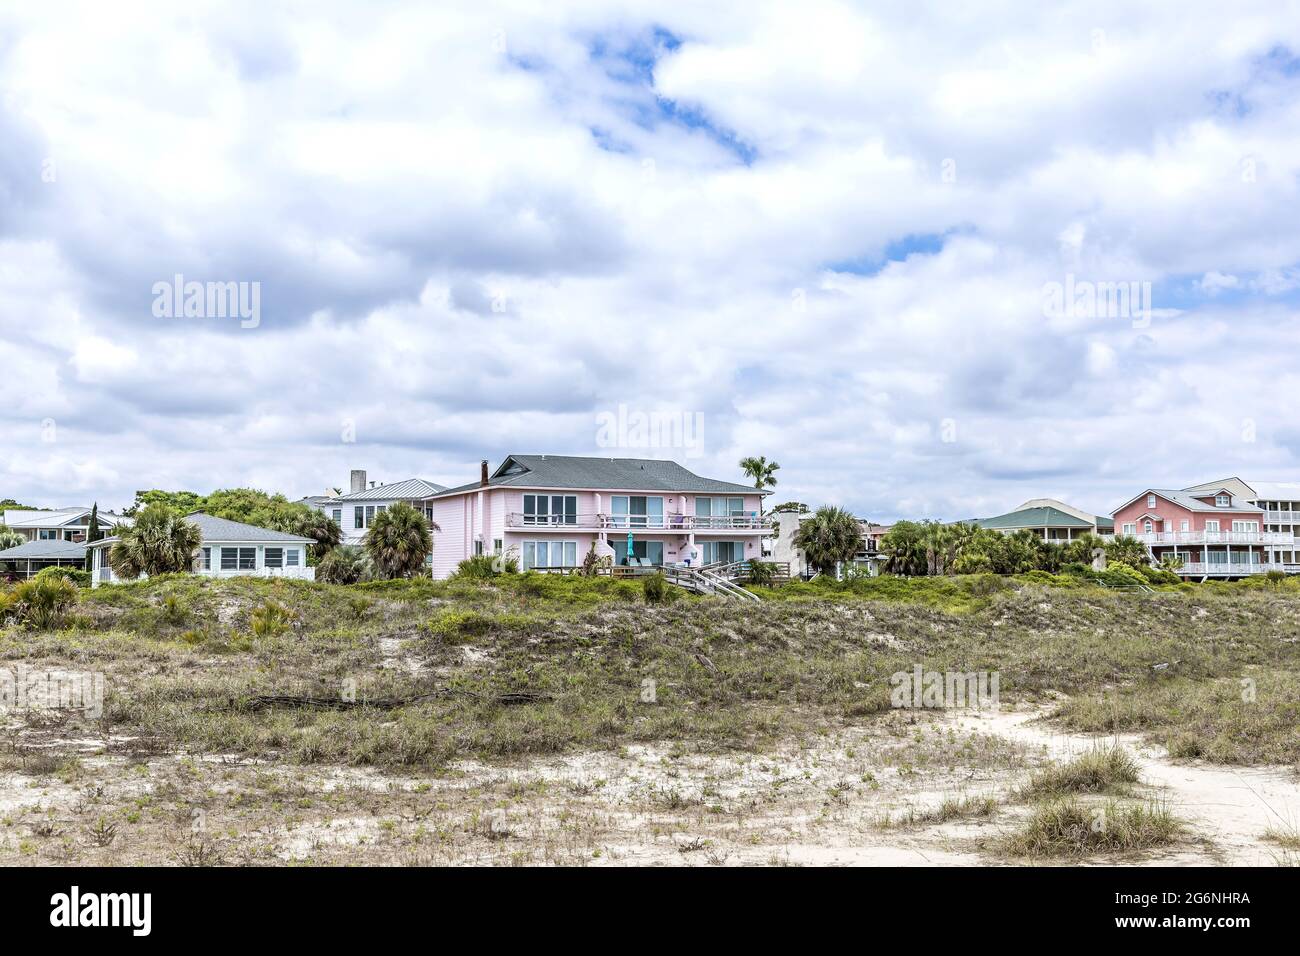 A row of beach houses and homes on the shores of Tybee Island, Georgia Stock Photo